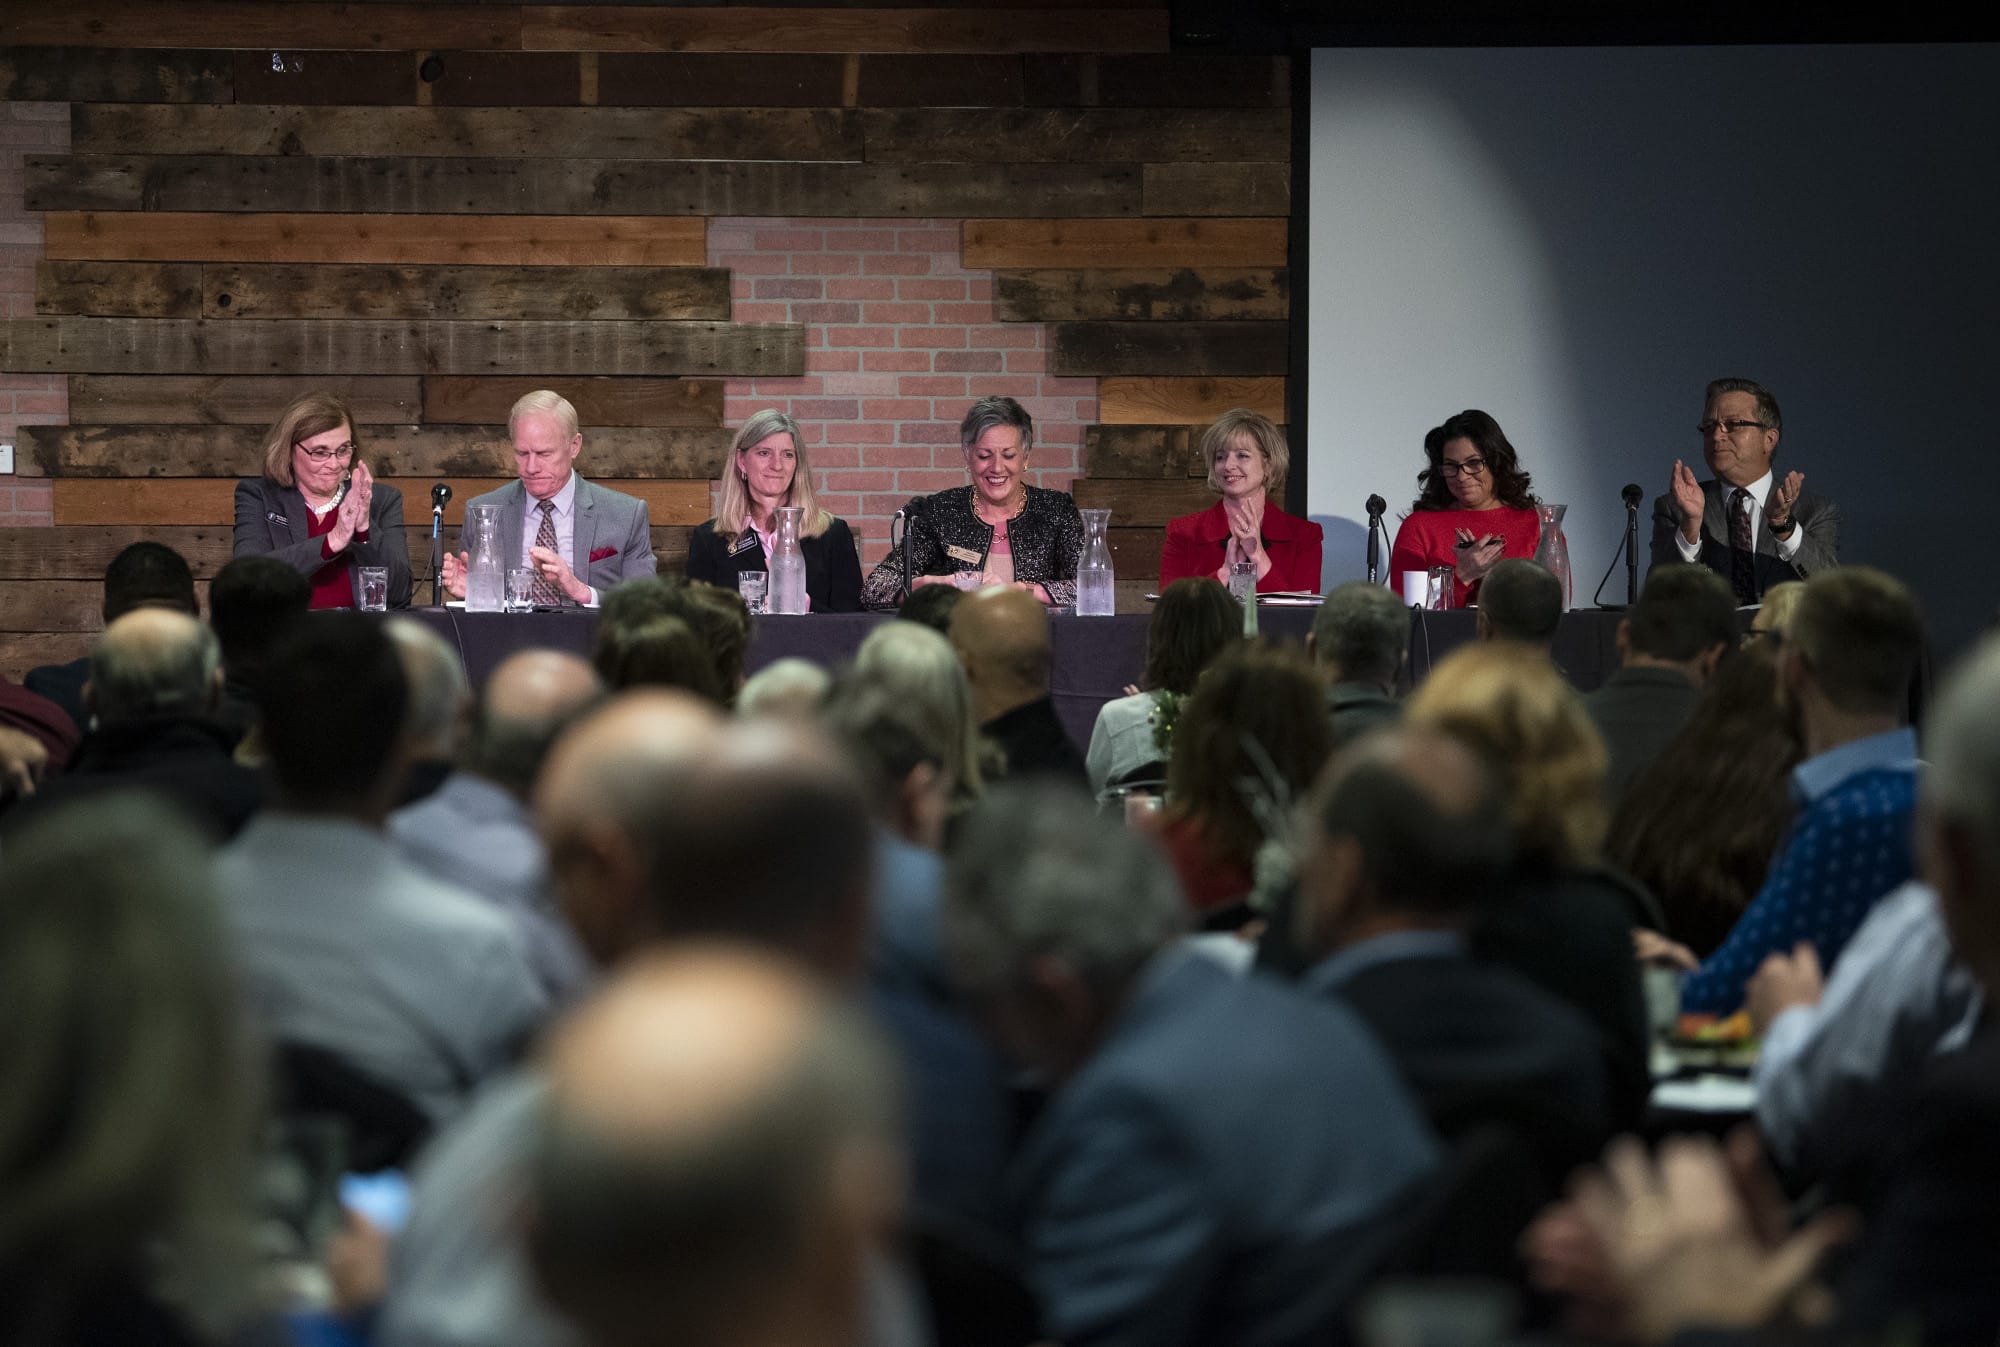 State legislators from Clark County reviewed a wide range of topics during the annual Legislative Outlook Breakfast on Friday morning at WareHouse '23 in Vancouver. State Rep. Sharon Wylie, D-Vancouver, from left, state Rep. Paul Harris, R-Vancouver, state Rep. Vicki Kraft, R-Vancouver, state Sen. Lynda Wilson, R-Vancouver, state Sen. Annette Cleveland, D-Vancouver, state Rep. Monica Stonier, D-Vancouver, and state Rep. Larry Hoff, R-Vancouver, spoke during the breakfast.